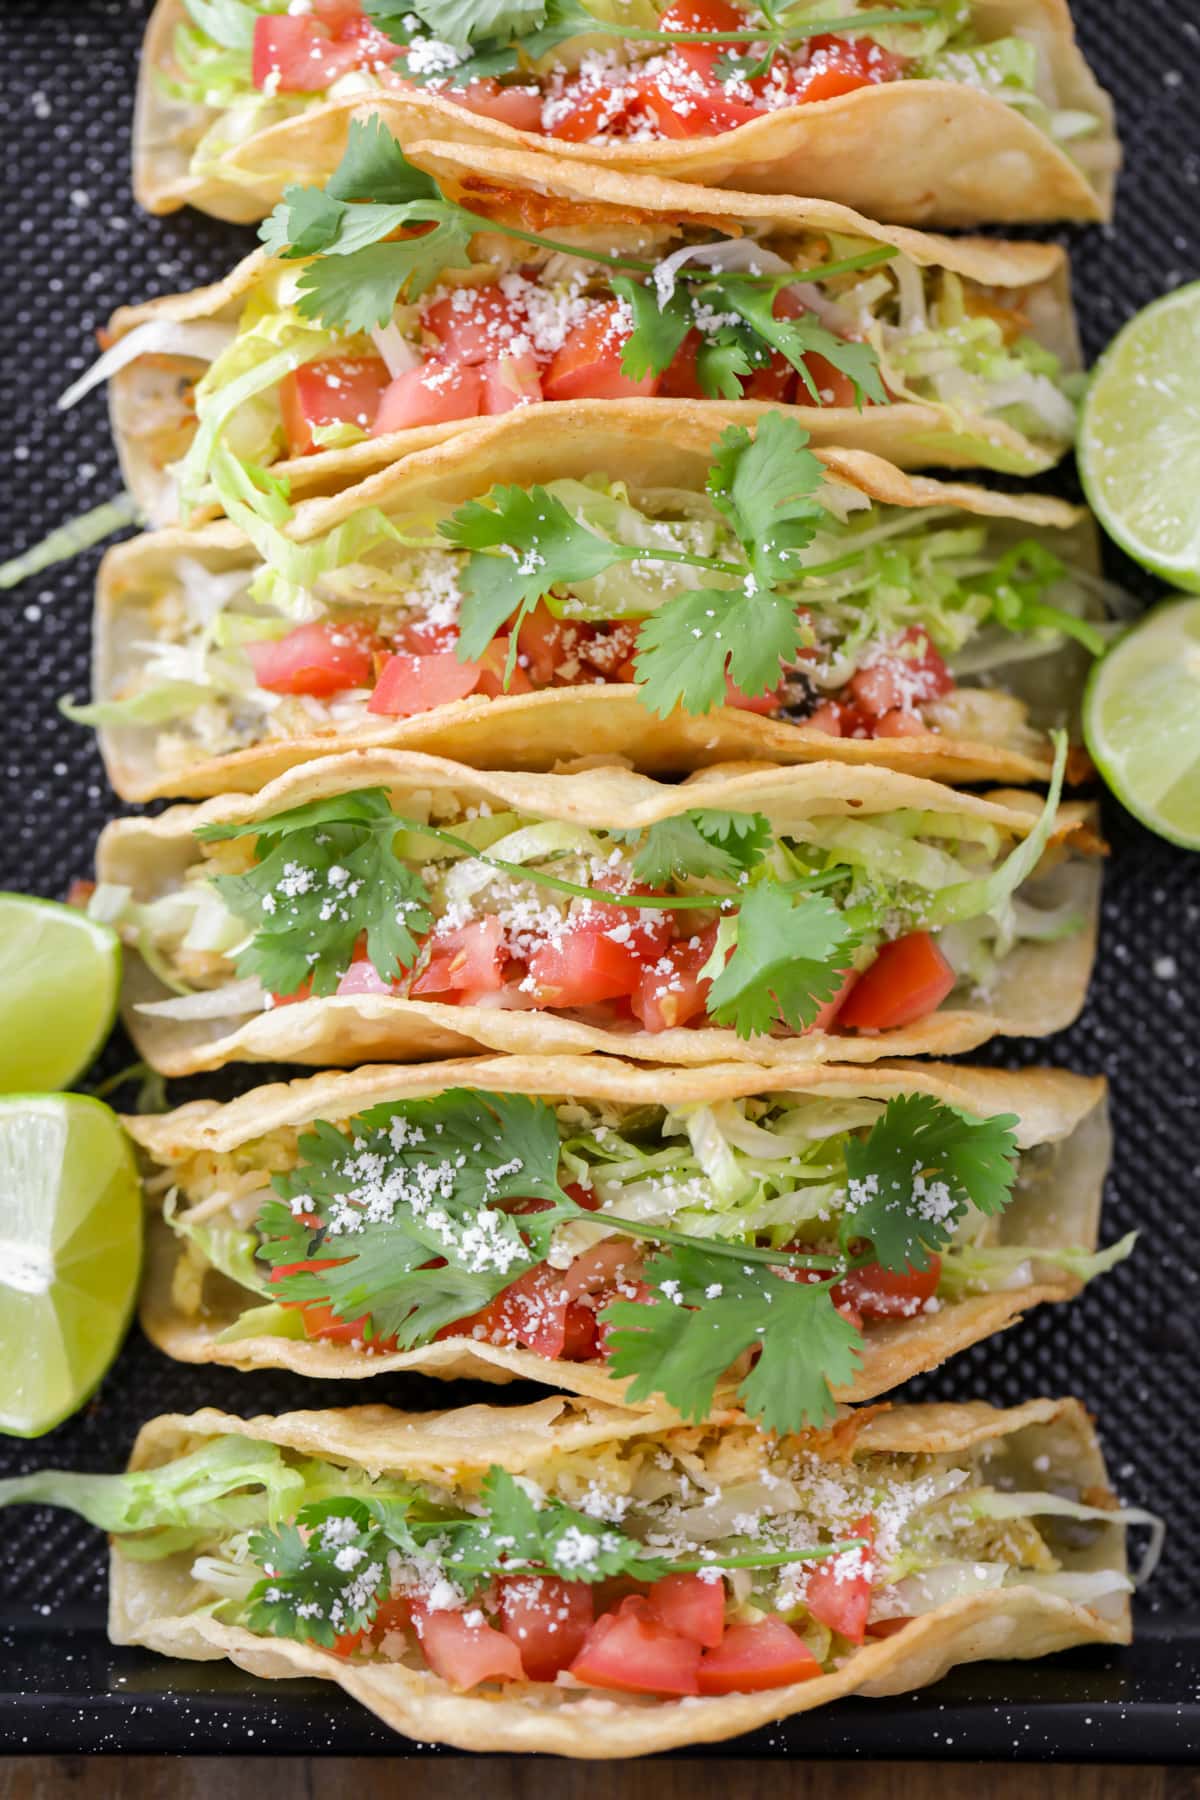 Six Chicken tacos lined up on a gray plate.